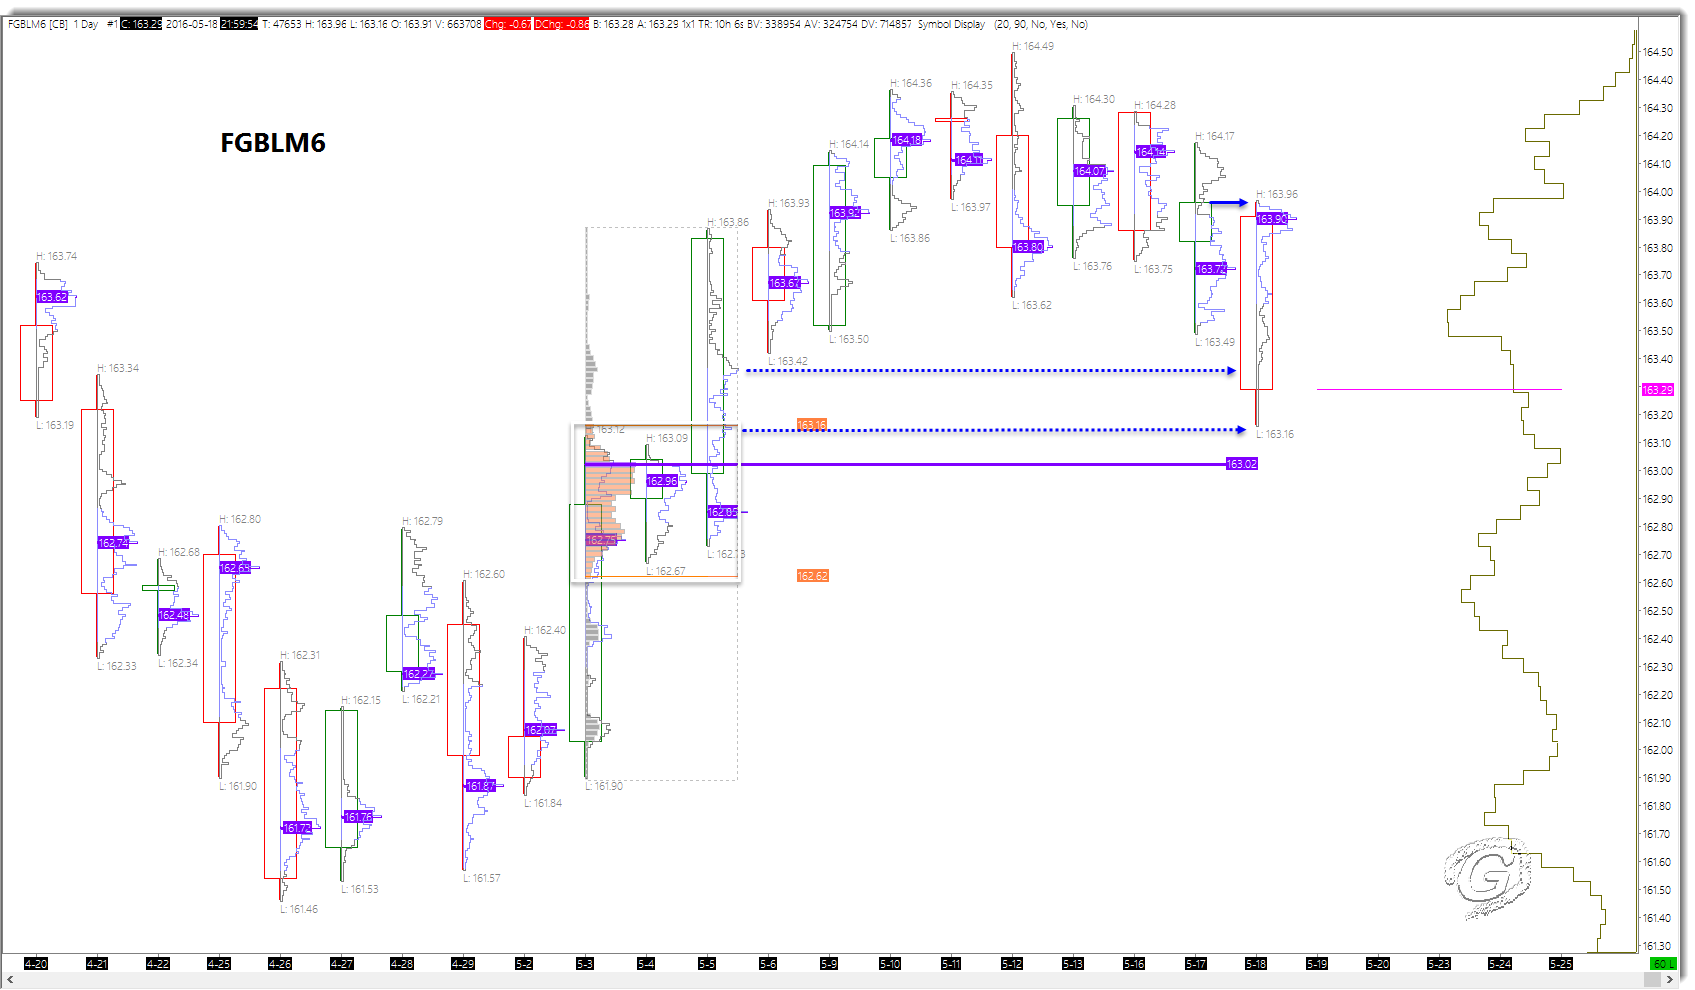 BUND (FGBL) Failed to test prev day's upper balance zone, auctioned lower.